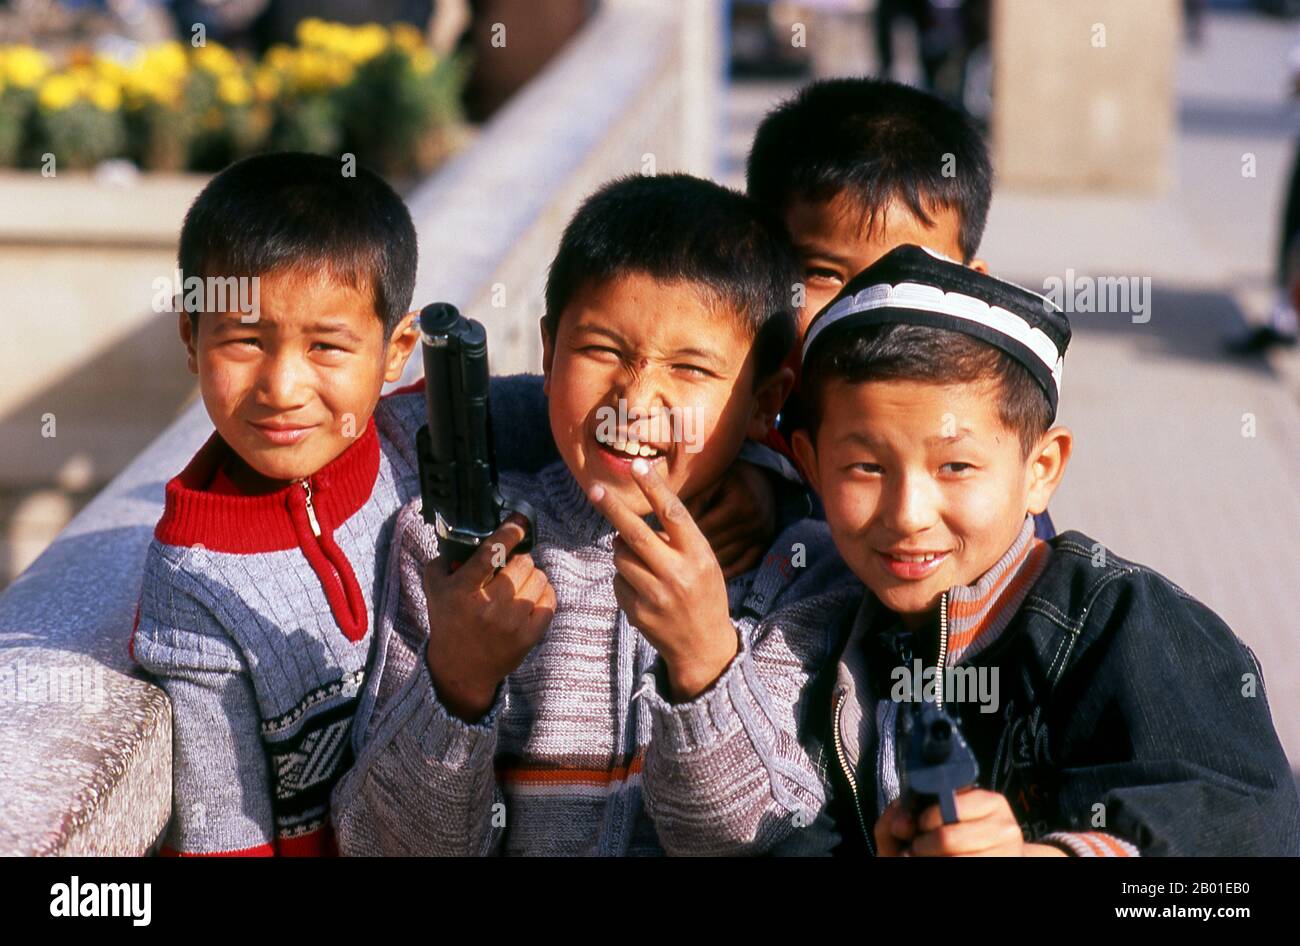 China: Uighur boys with their toy guns, Kuqa, Xinjiang Province.  The ancient oasis town of Kuqa (Kuche), though now overshadowed by Korla to the east and Aksu to the west, was once a key stop on the Northern Silk Road. It first came under Han Chinese control when it was conquered, in 91 CE, by the indomitable General Ban Chao.  By the 4th century it had emerged as an important centre of Tocharian civilisation sitting astride not just the Northern Silk Road, but also lesser routes to Dzungaria in the north and Khotan in the south. The celebrated Buddhist monk Kumarajiva was born here. Stock Photo